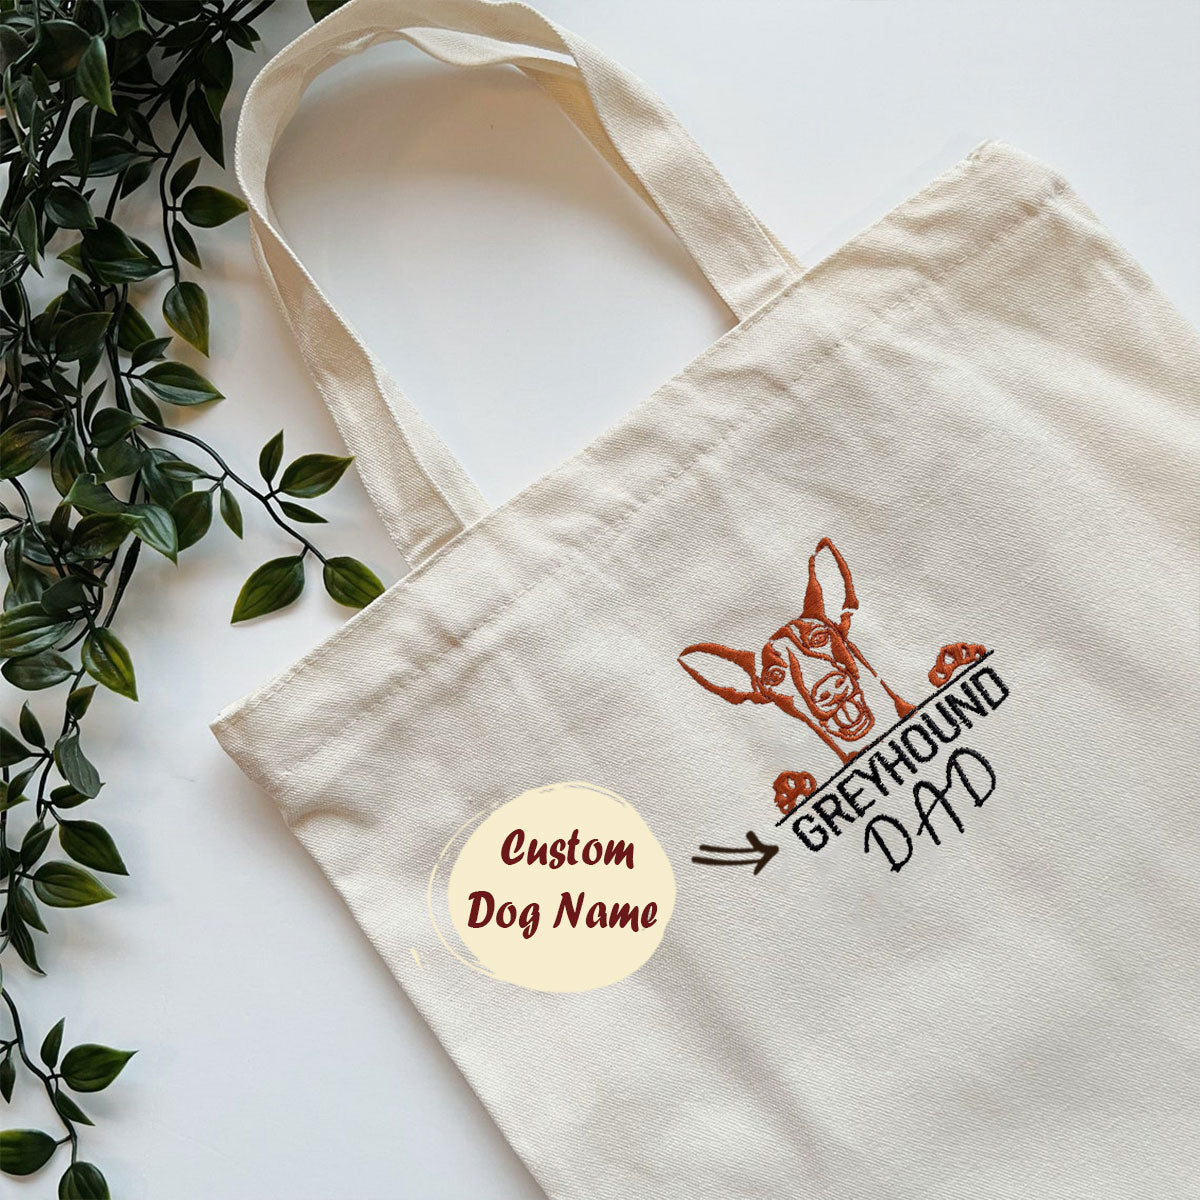 Custom Italian Greyhound Dog Dad Embroidered Tote Bag, Personalized Tote Bag with Dog Name, Best Gifts For Greyhound Lovers